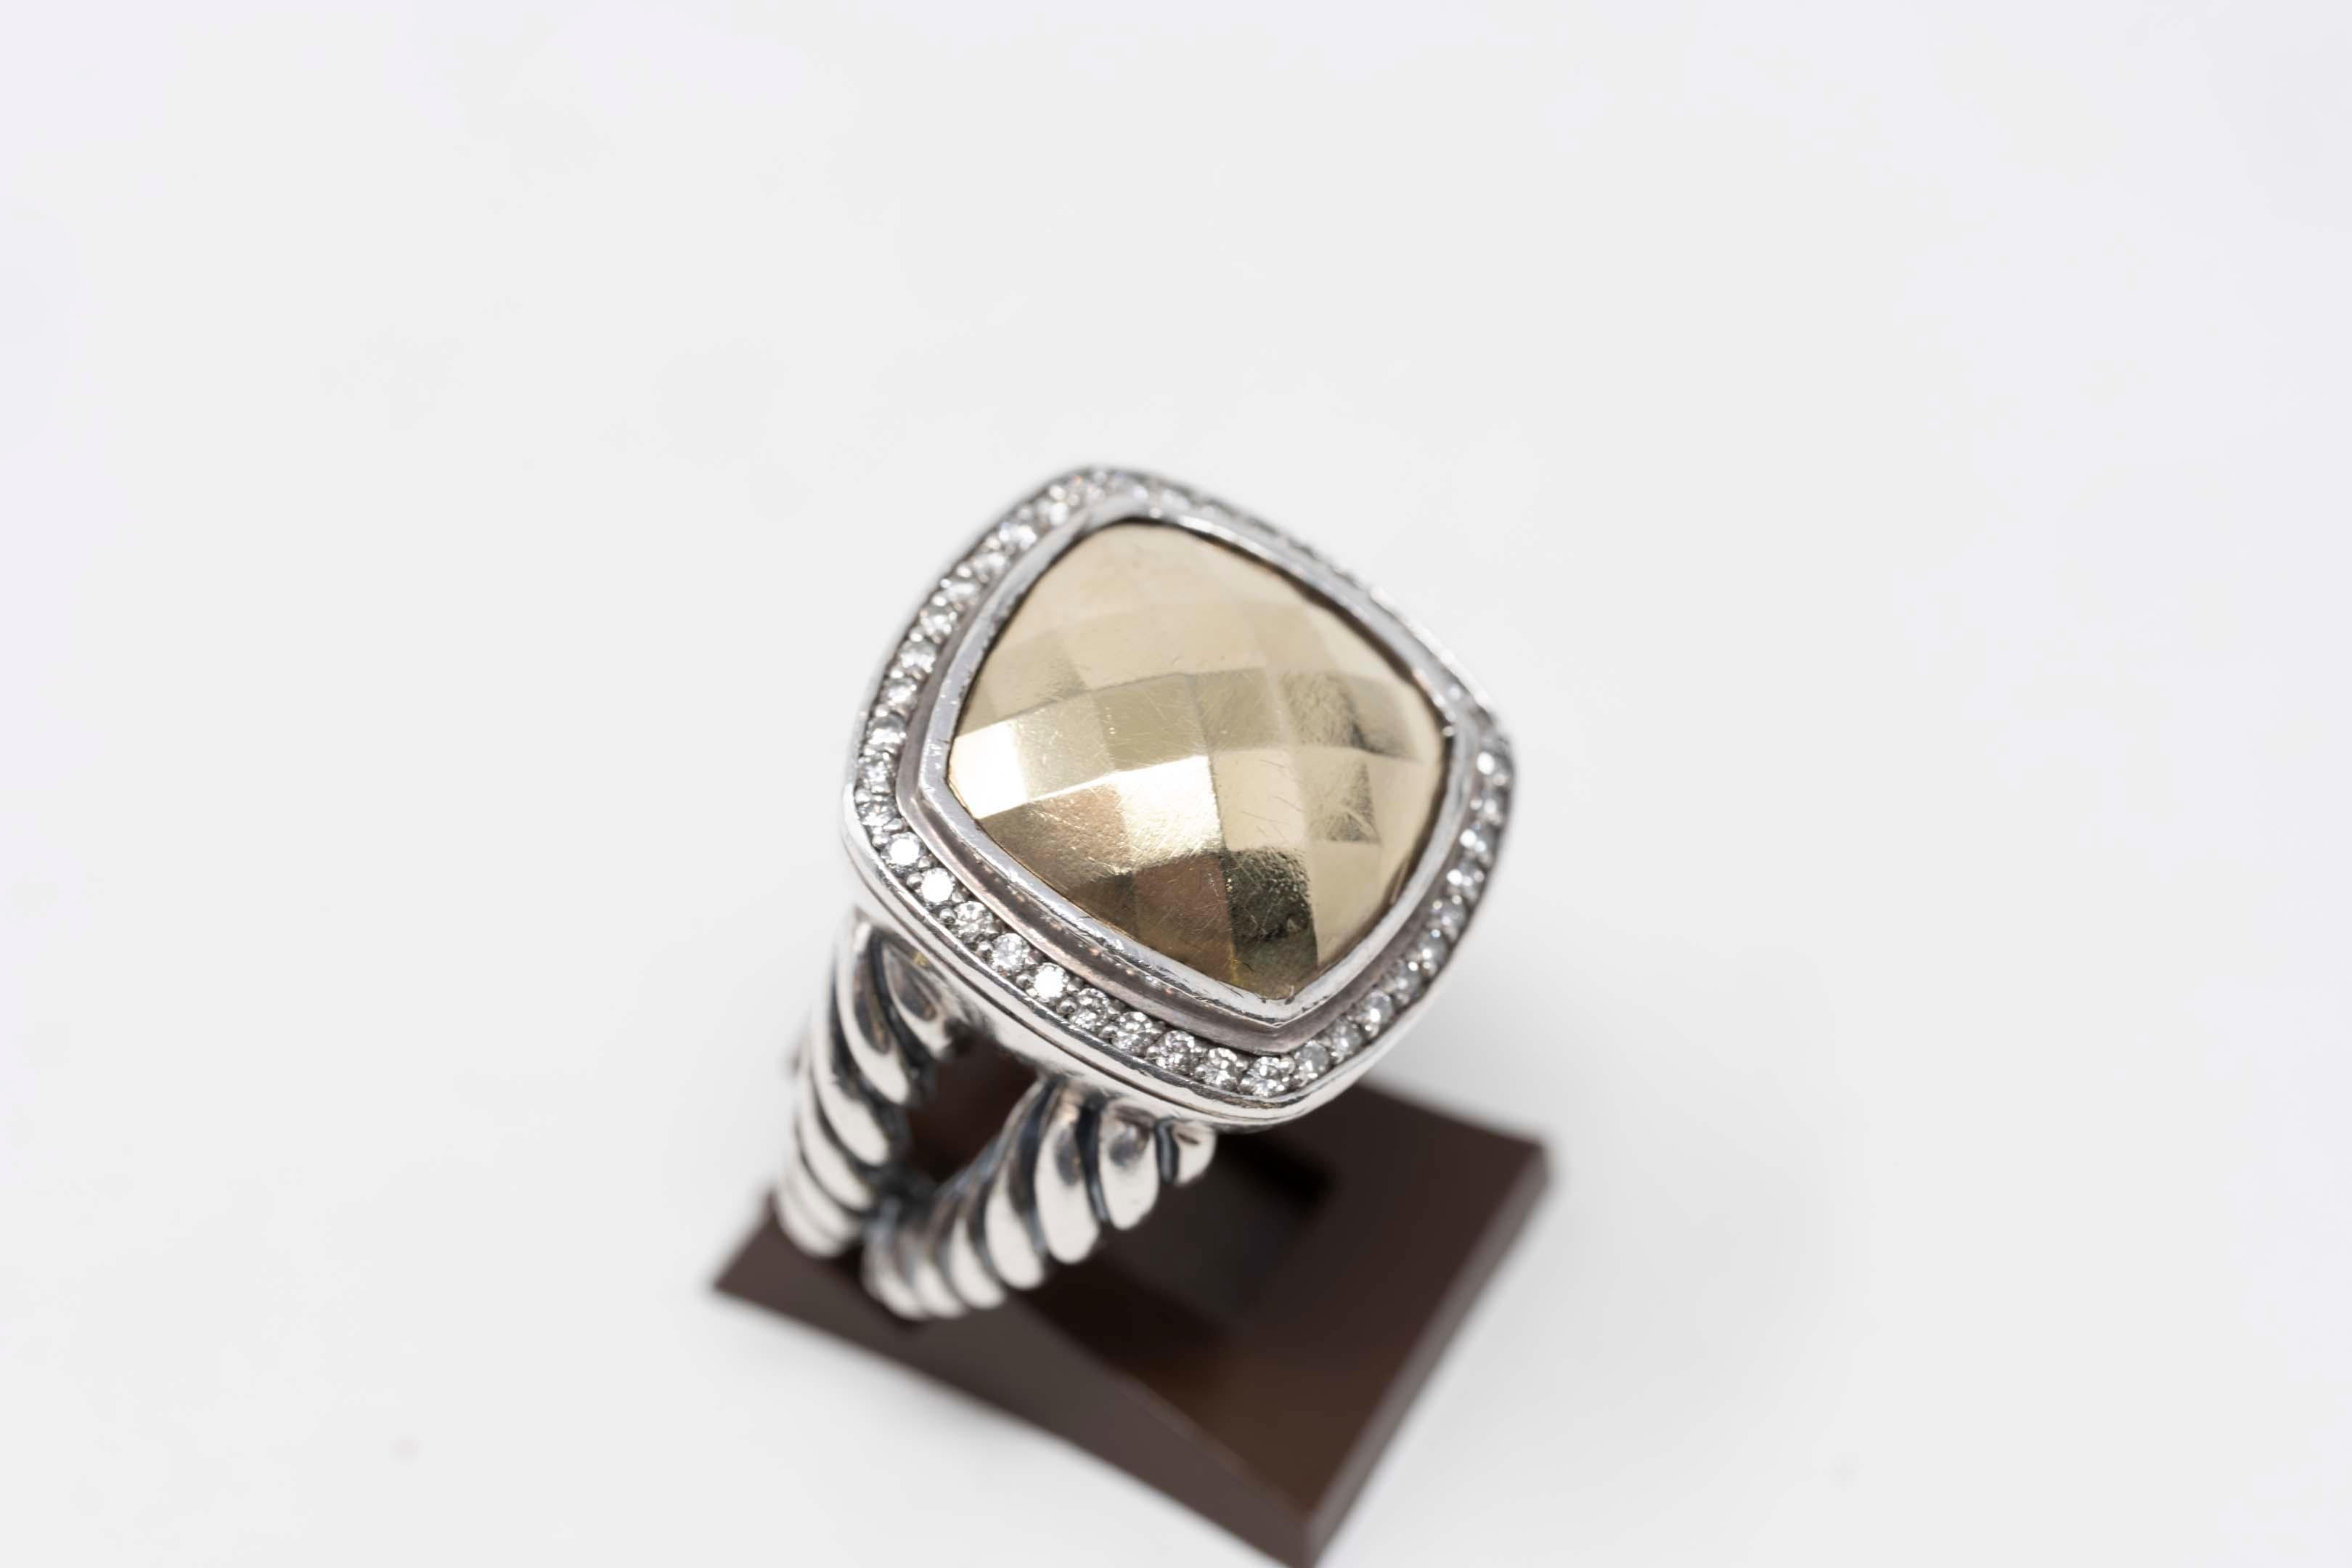 David Yurman Albion ring gold dome & 40 diamonds, 925 silver and 18k yellow gold size 6.5, top 20.5mm. Marked on the side and inside DY 925 1/4 750. In good condition, 21st century, 15.9 grams.
